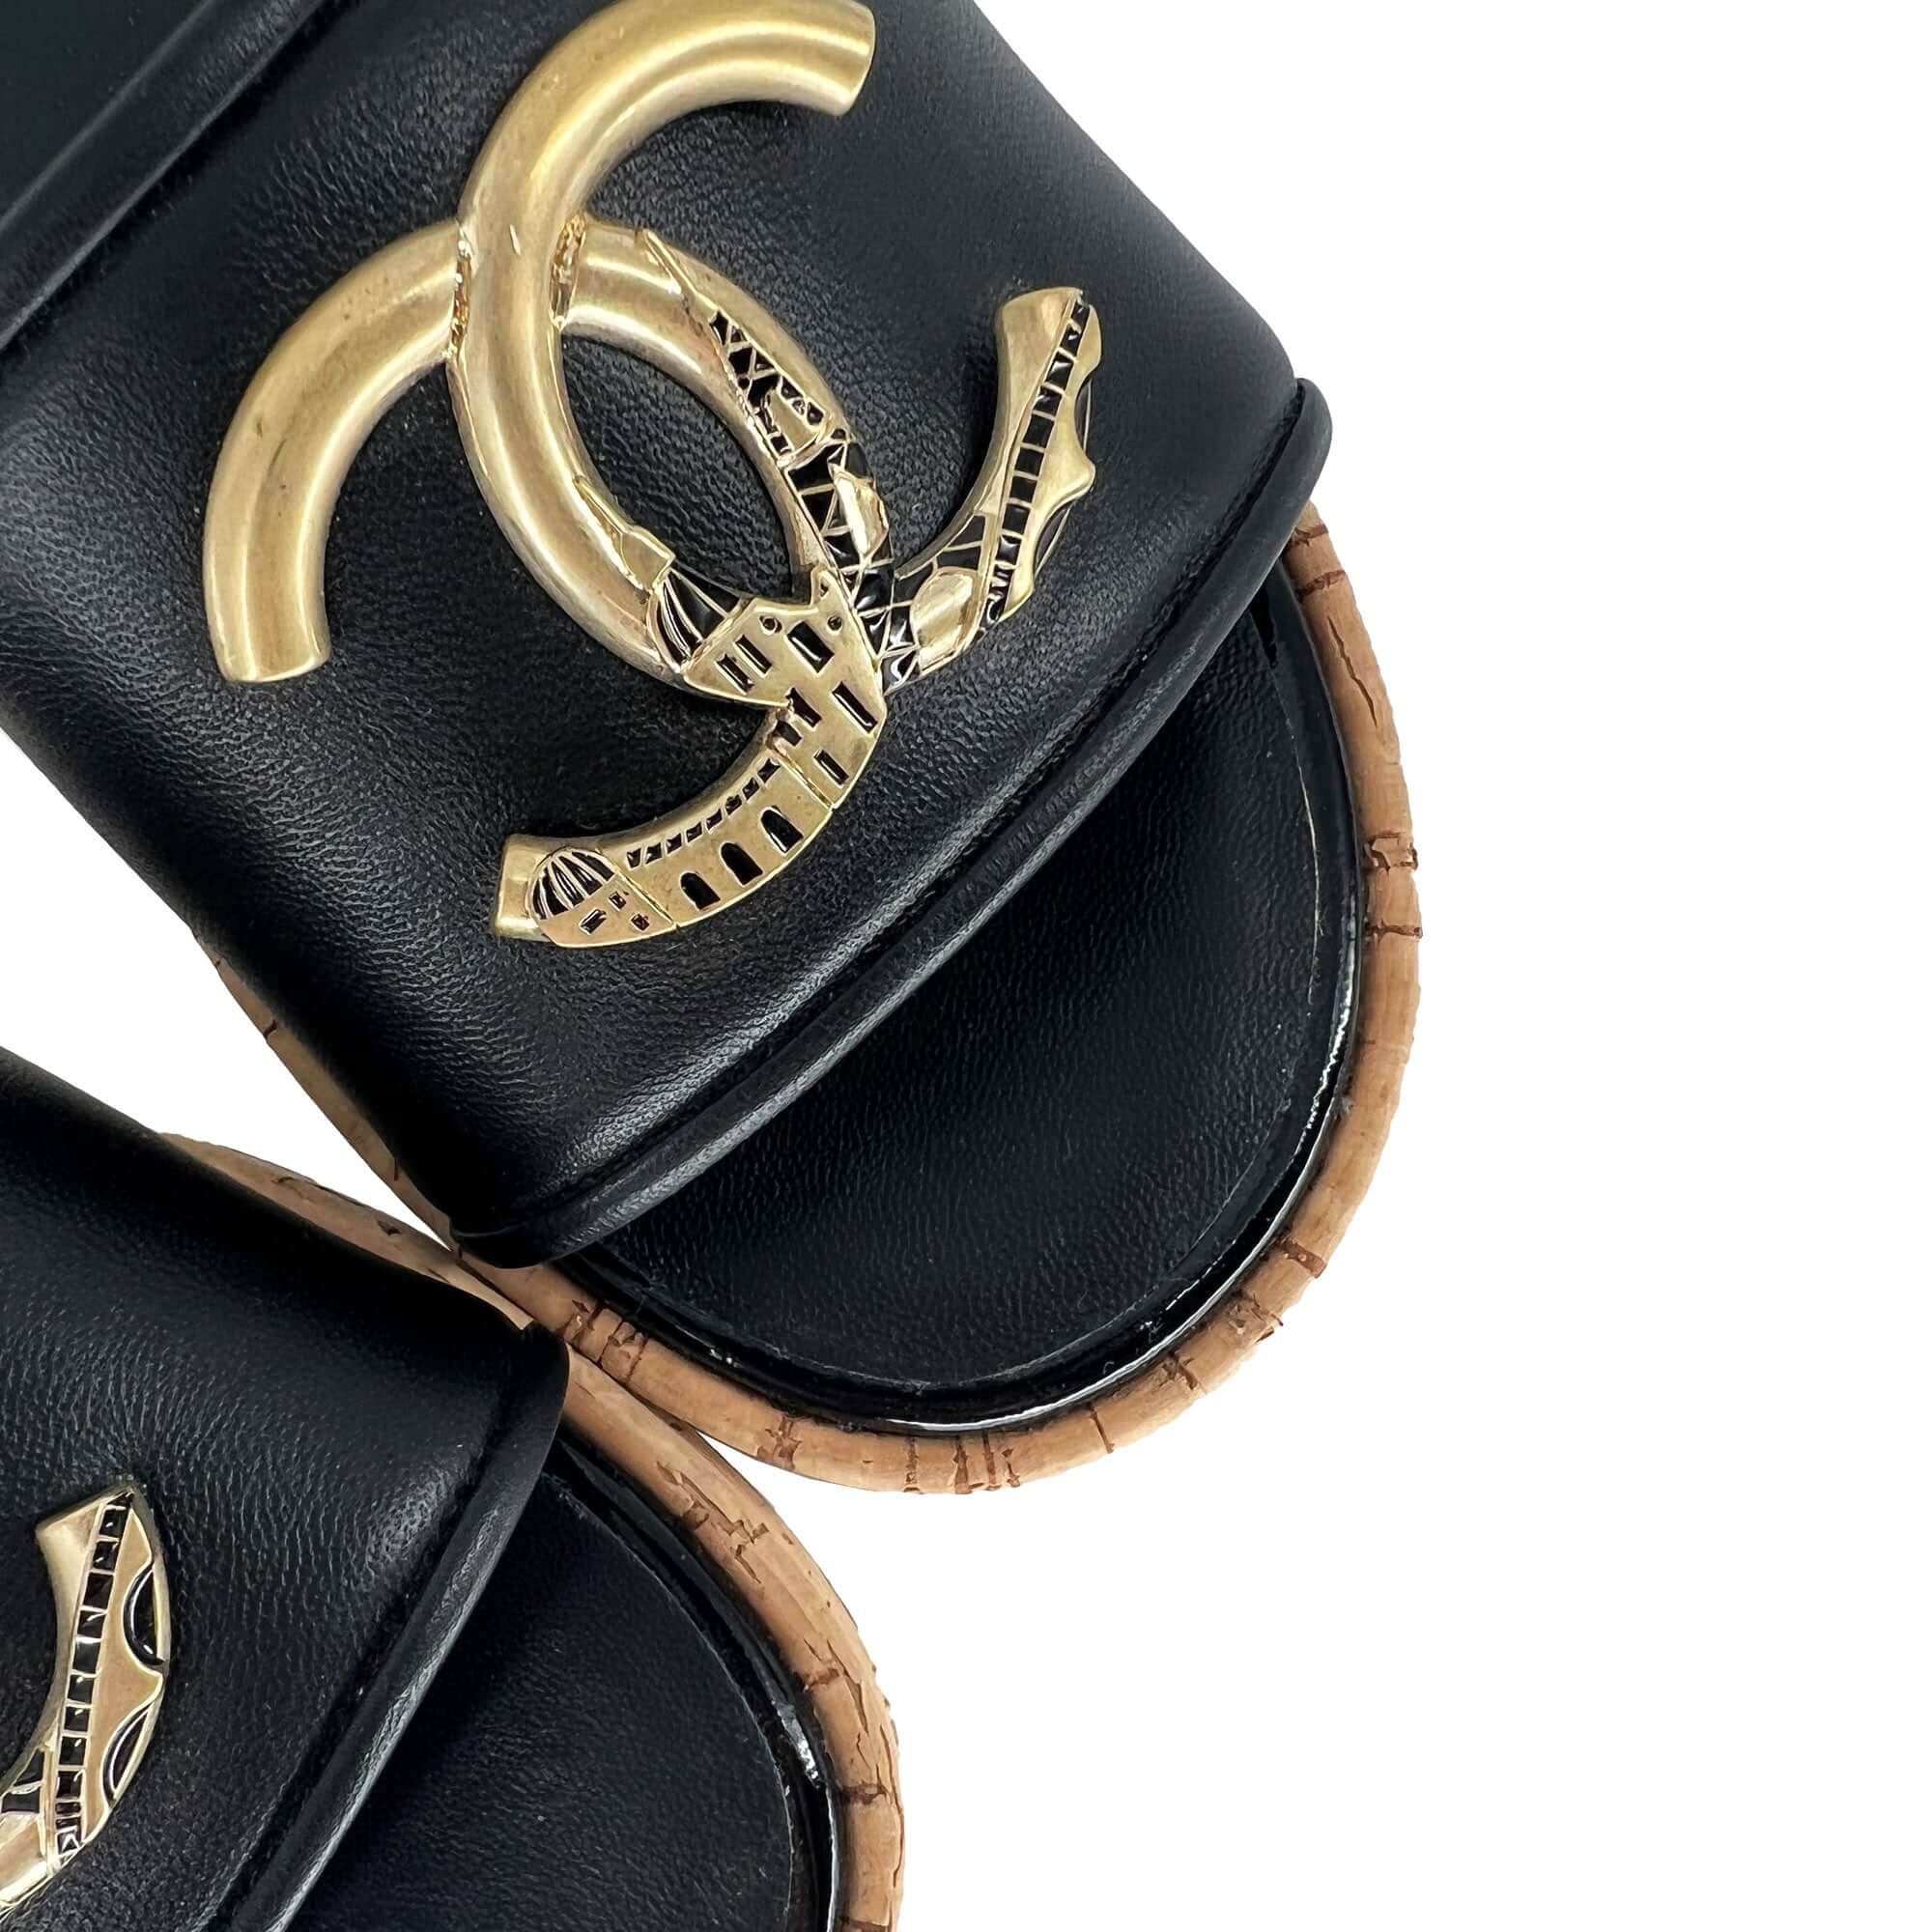 Chanel gold logo mules sandals